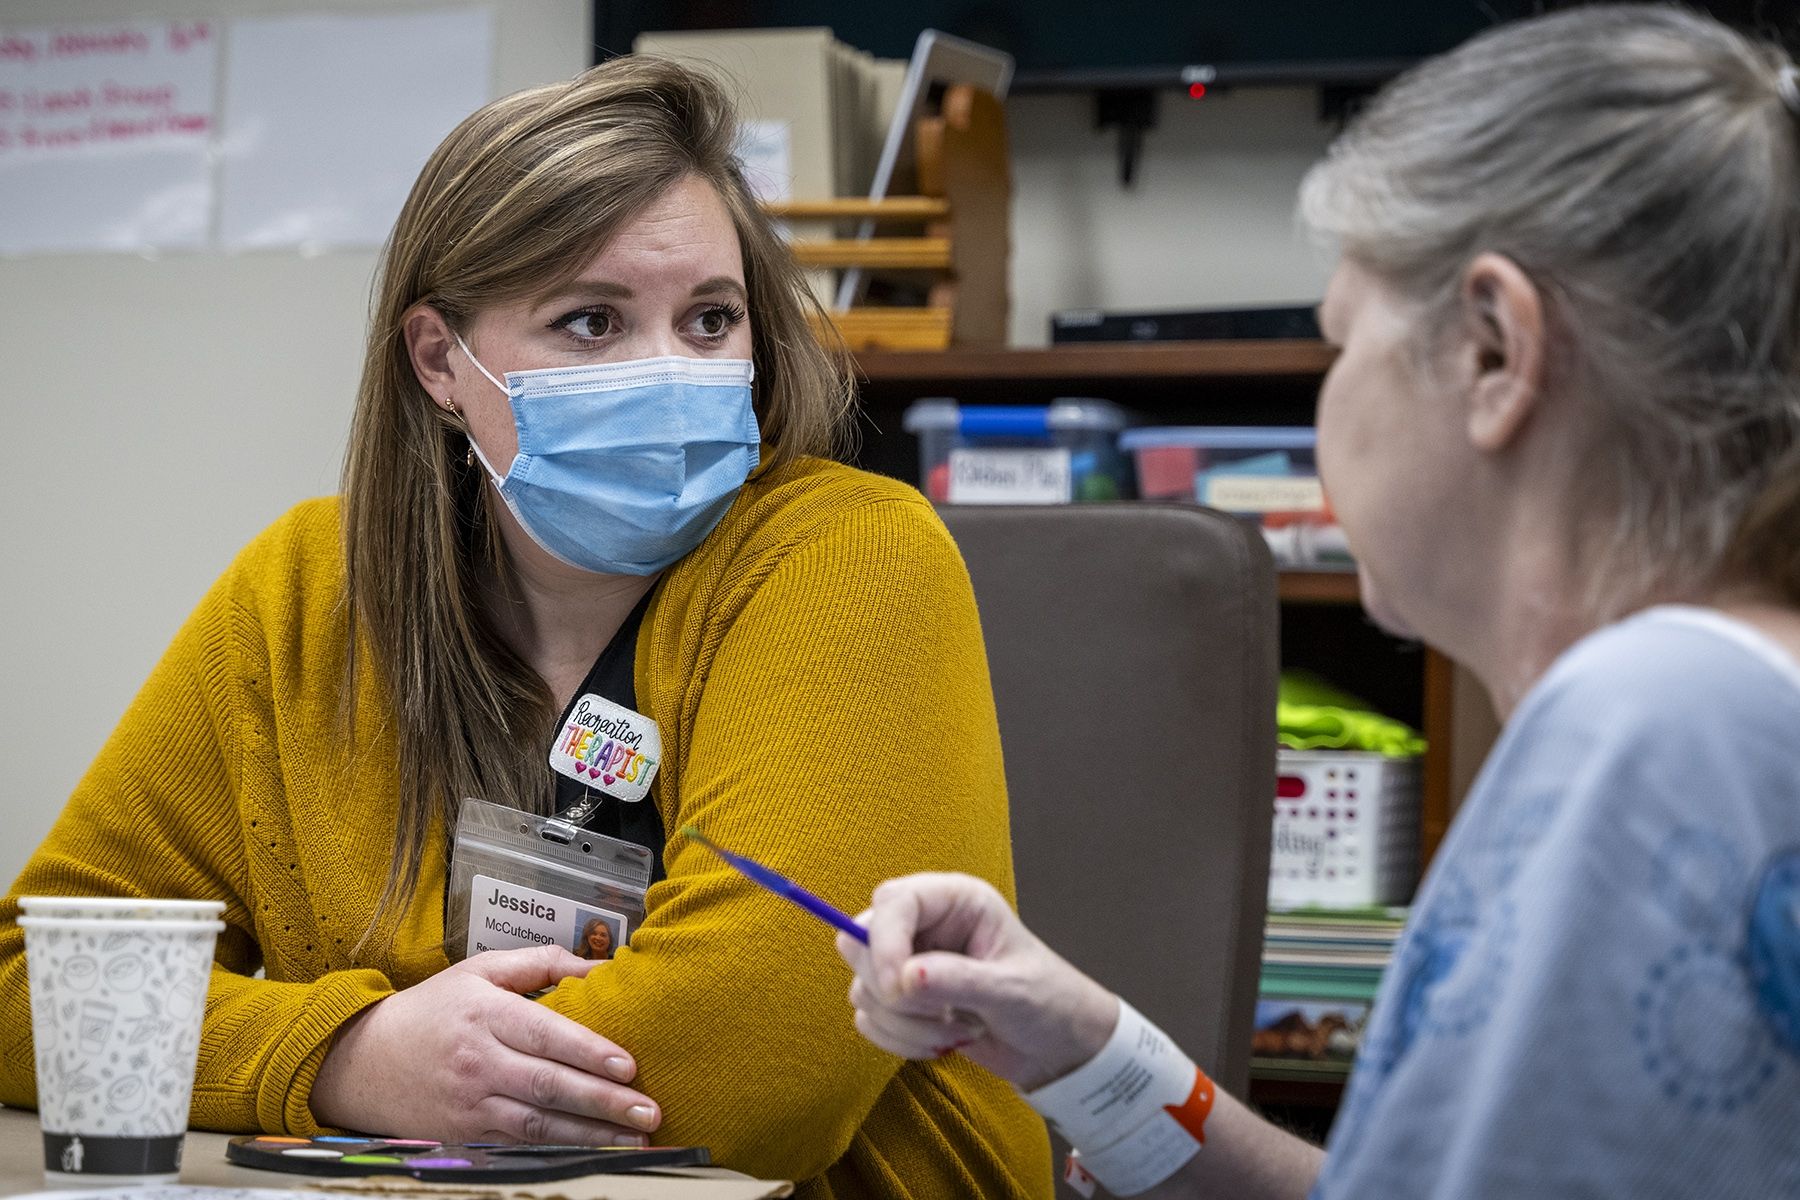 Jessica McCutcheon is seated next to an elderly female patient, watching her do arts and crafts. McCutcheon has dark blonde hair and brown eyes. She’s wearing a black top, mustard cardigan and a mask over her mouth and nose. 